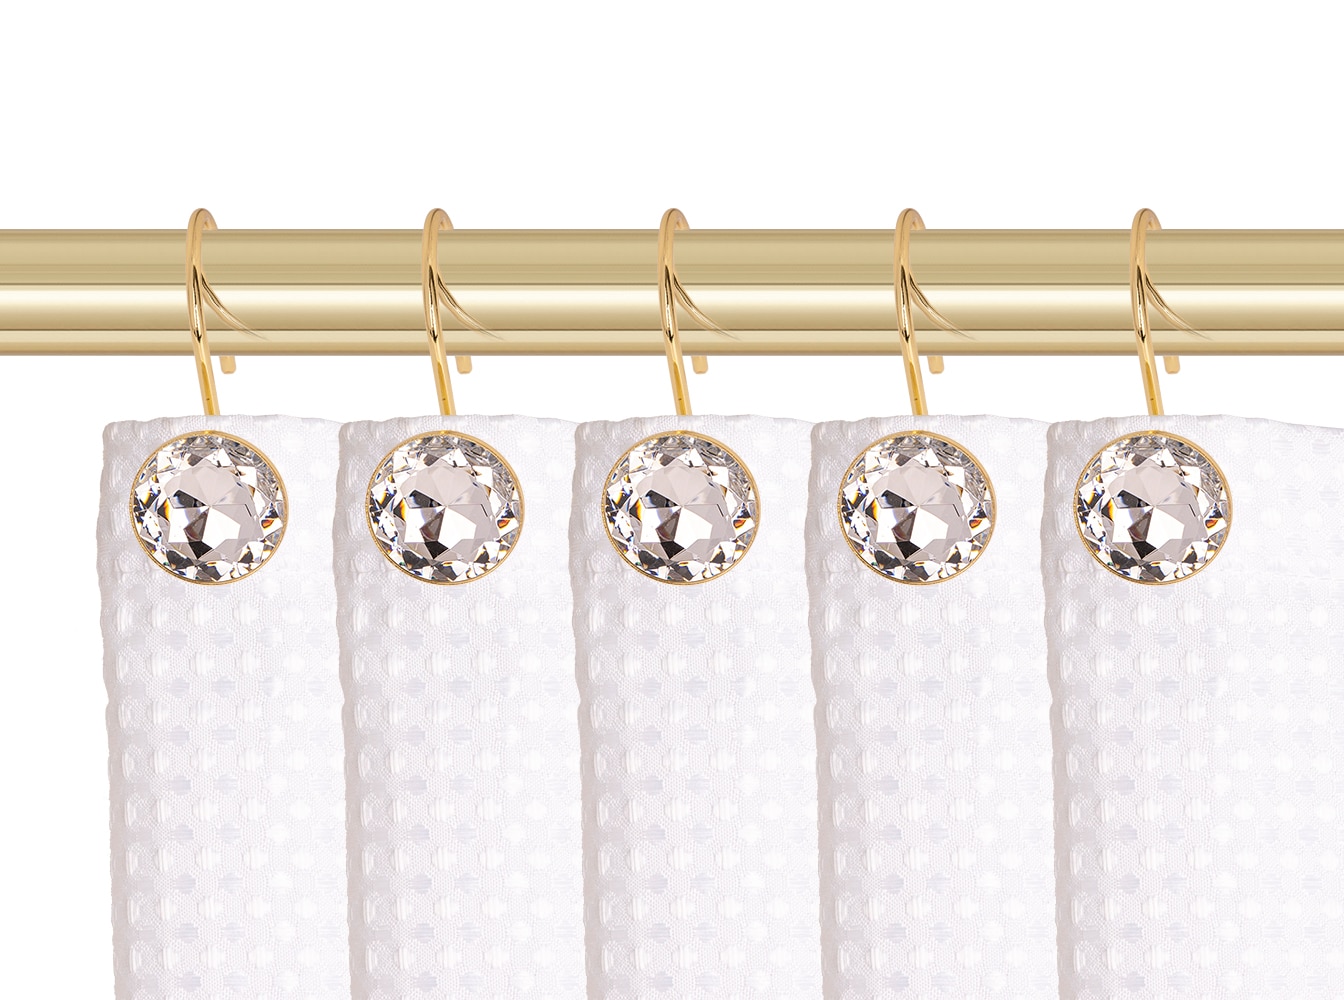 Utopia Alley HK23GD Hooks Curtain Rings for Bathroom, Gold - Set of 12